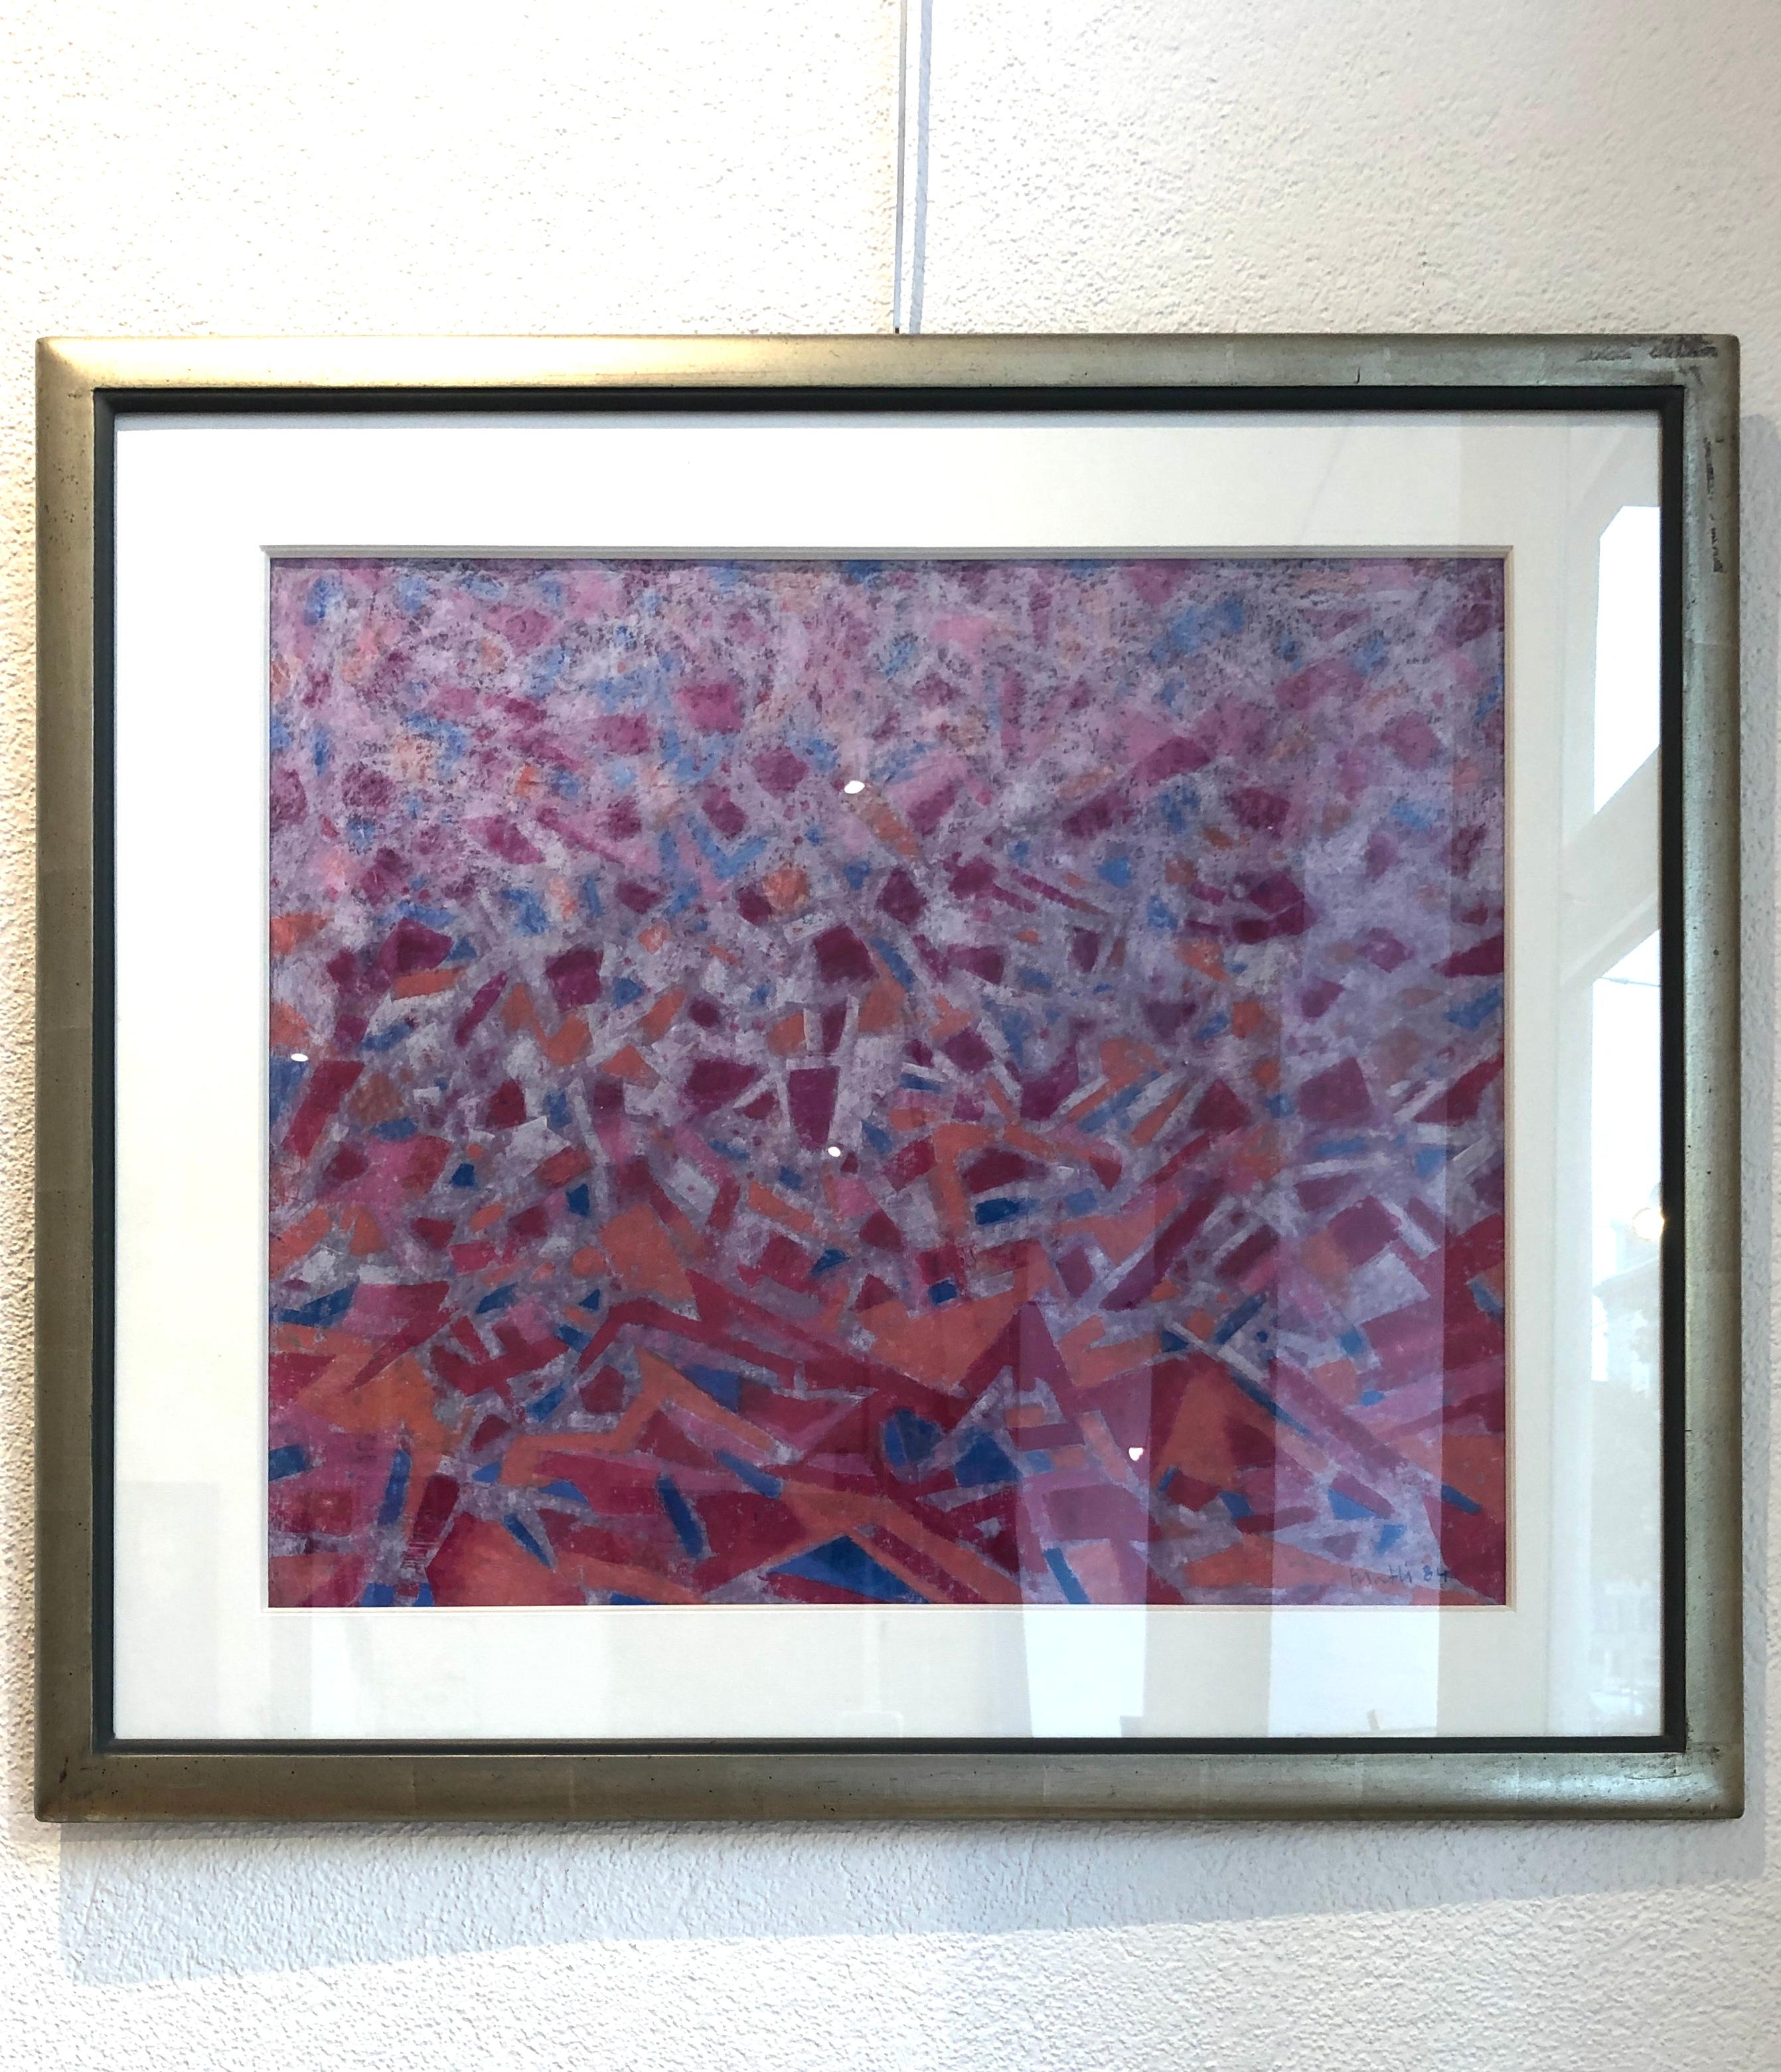 Sequin composition - Painting by Walter Mafli